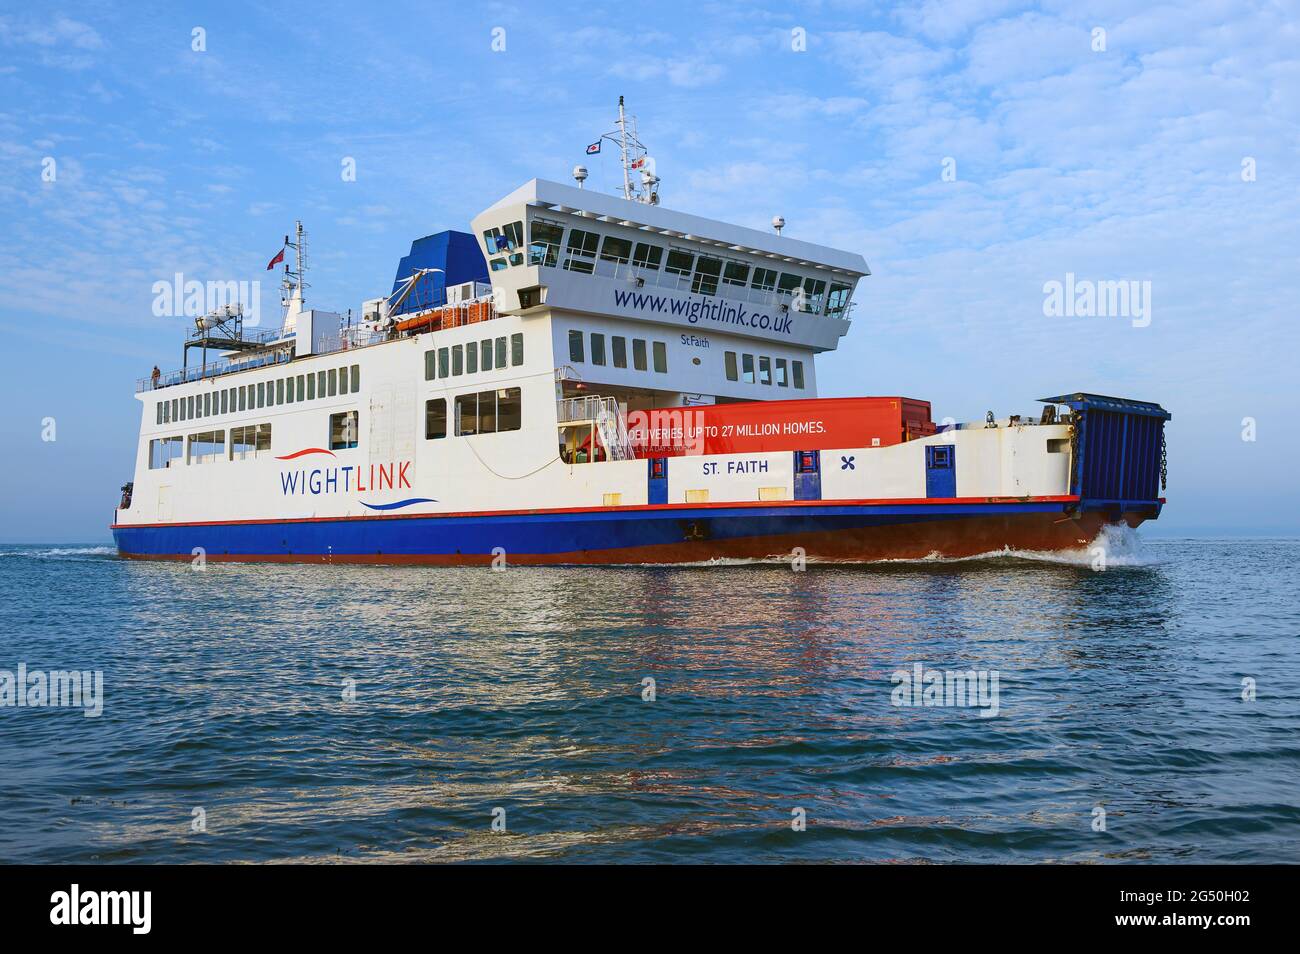 Wightlink's car and passenger ferry St. Faith links Fishbourne on the Isle of Wight with Portsmouth on the mainland - June 2021 Stock Photo